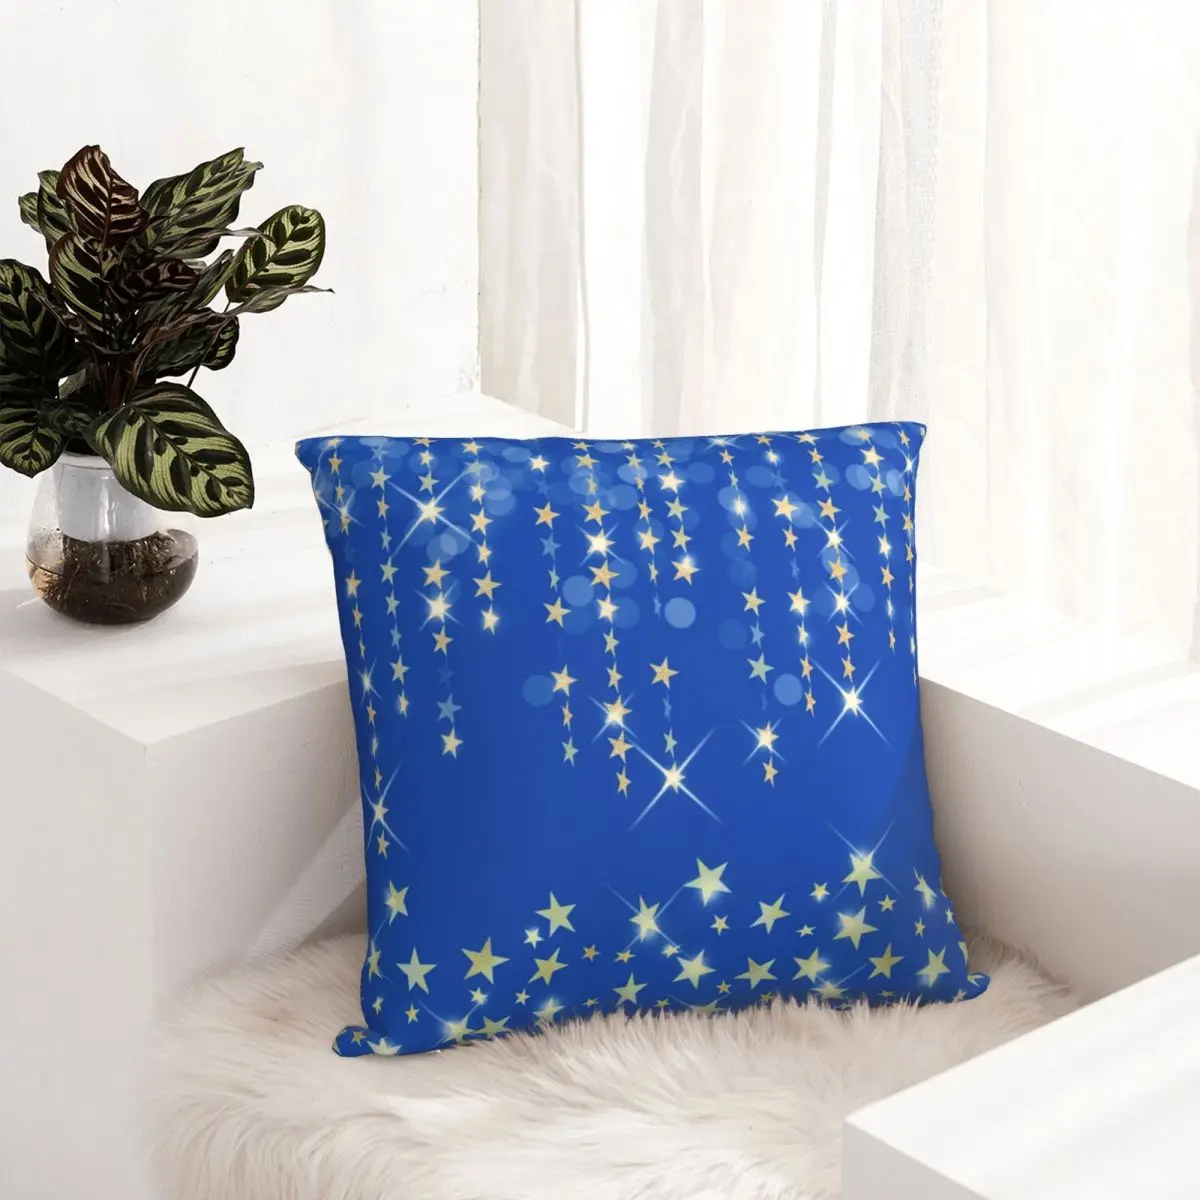 Golden Cobalt Blue Bling Starry Square Pillowcase Cushion Cover funny ZipperHome Decorative Polyester Throw Pillow Case for Sofa images - 6